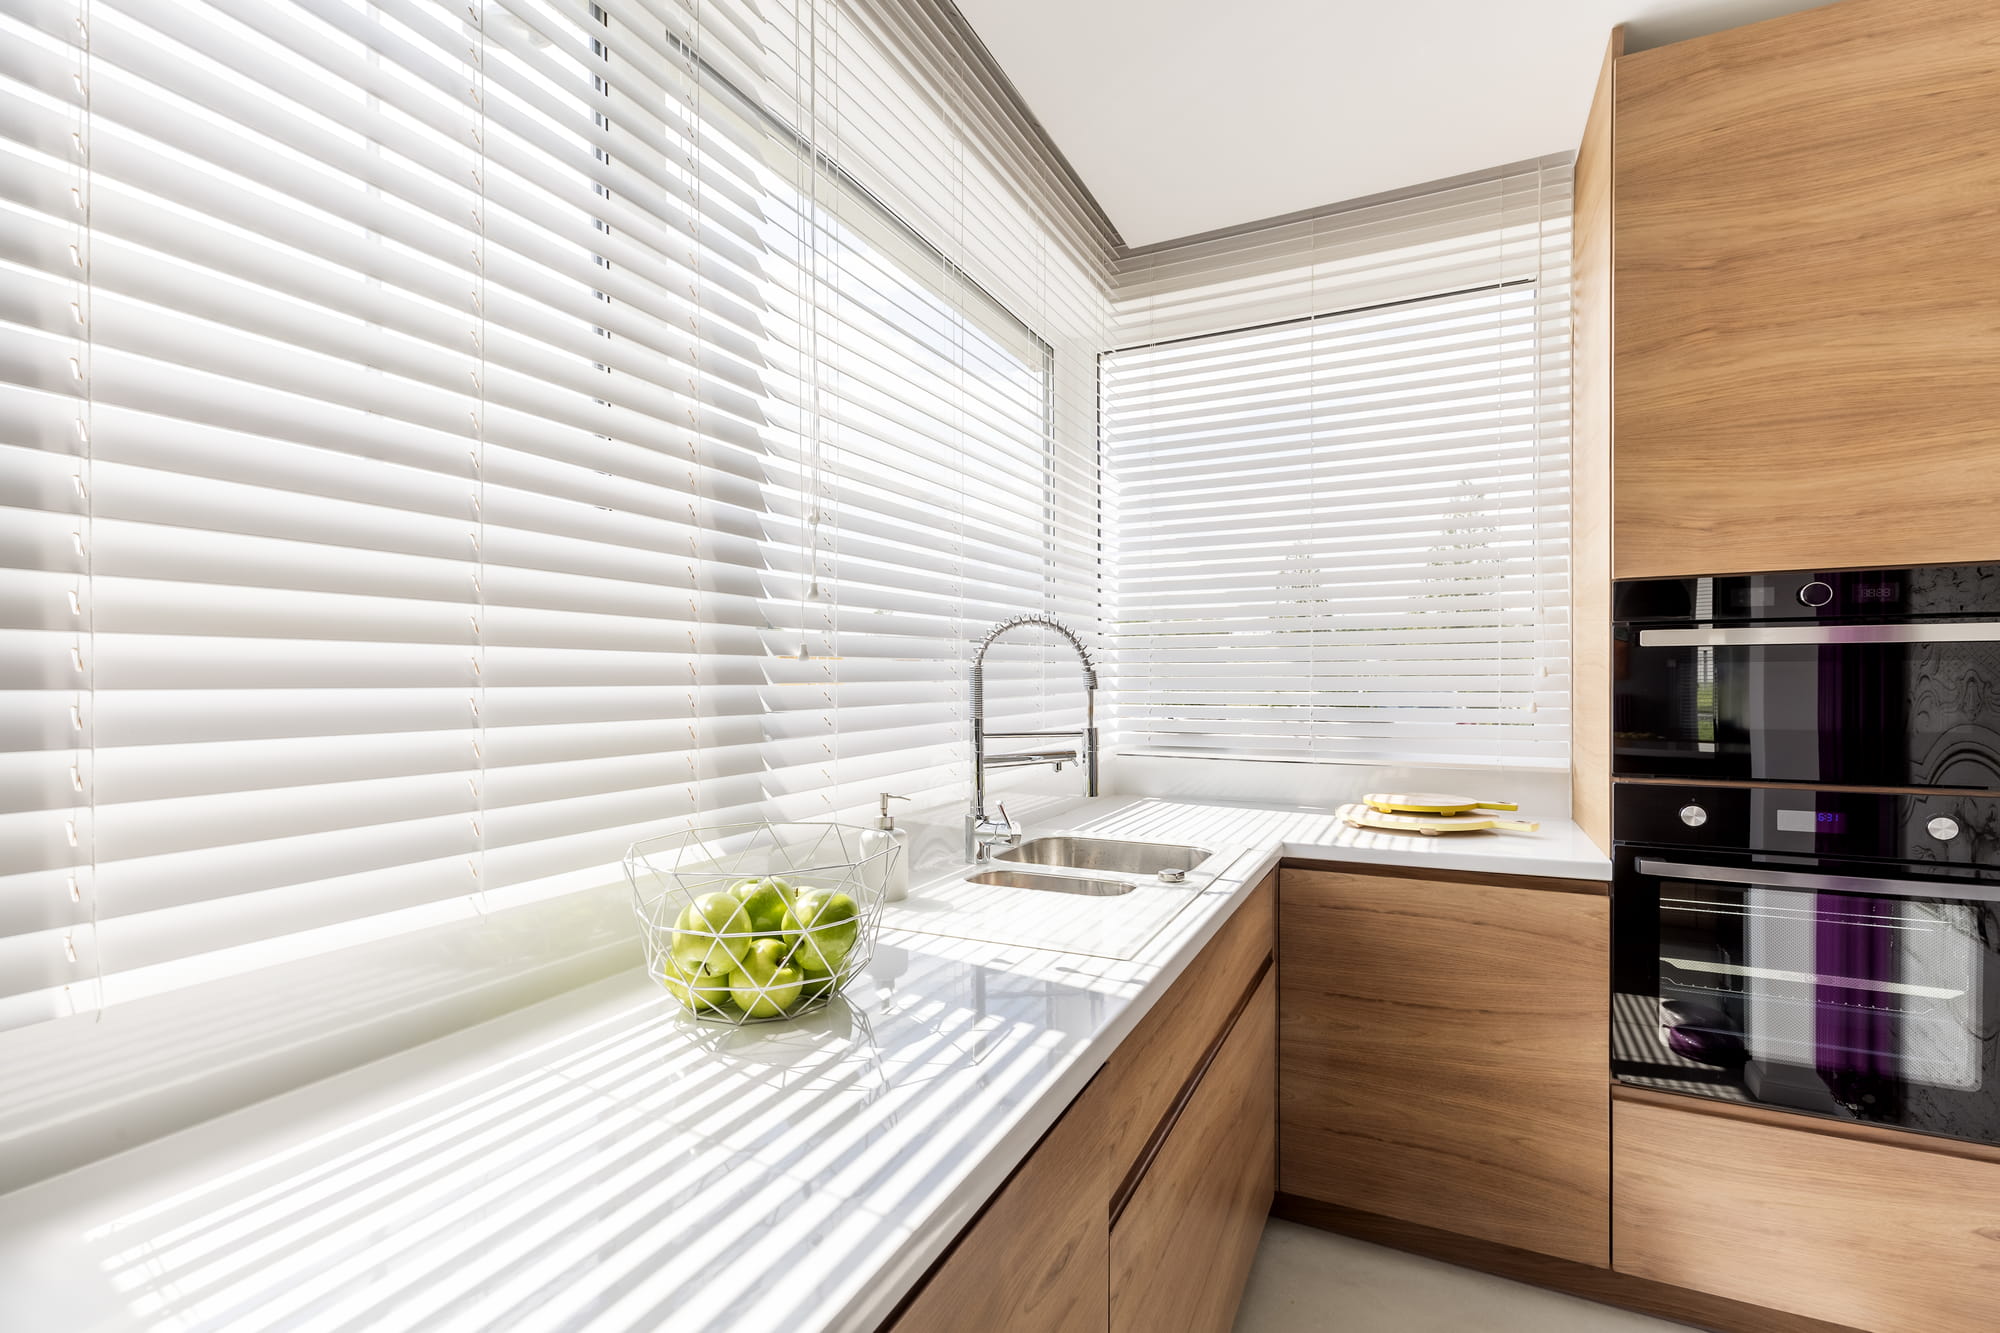 History of window blinds – blinds rolled up halfway